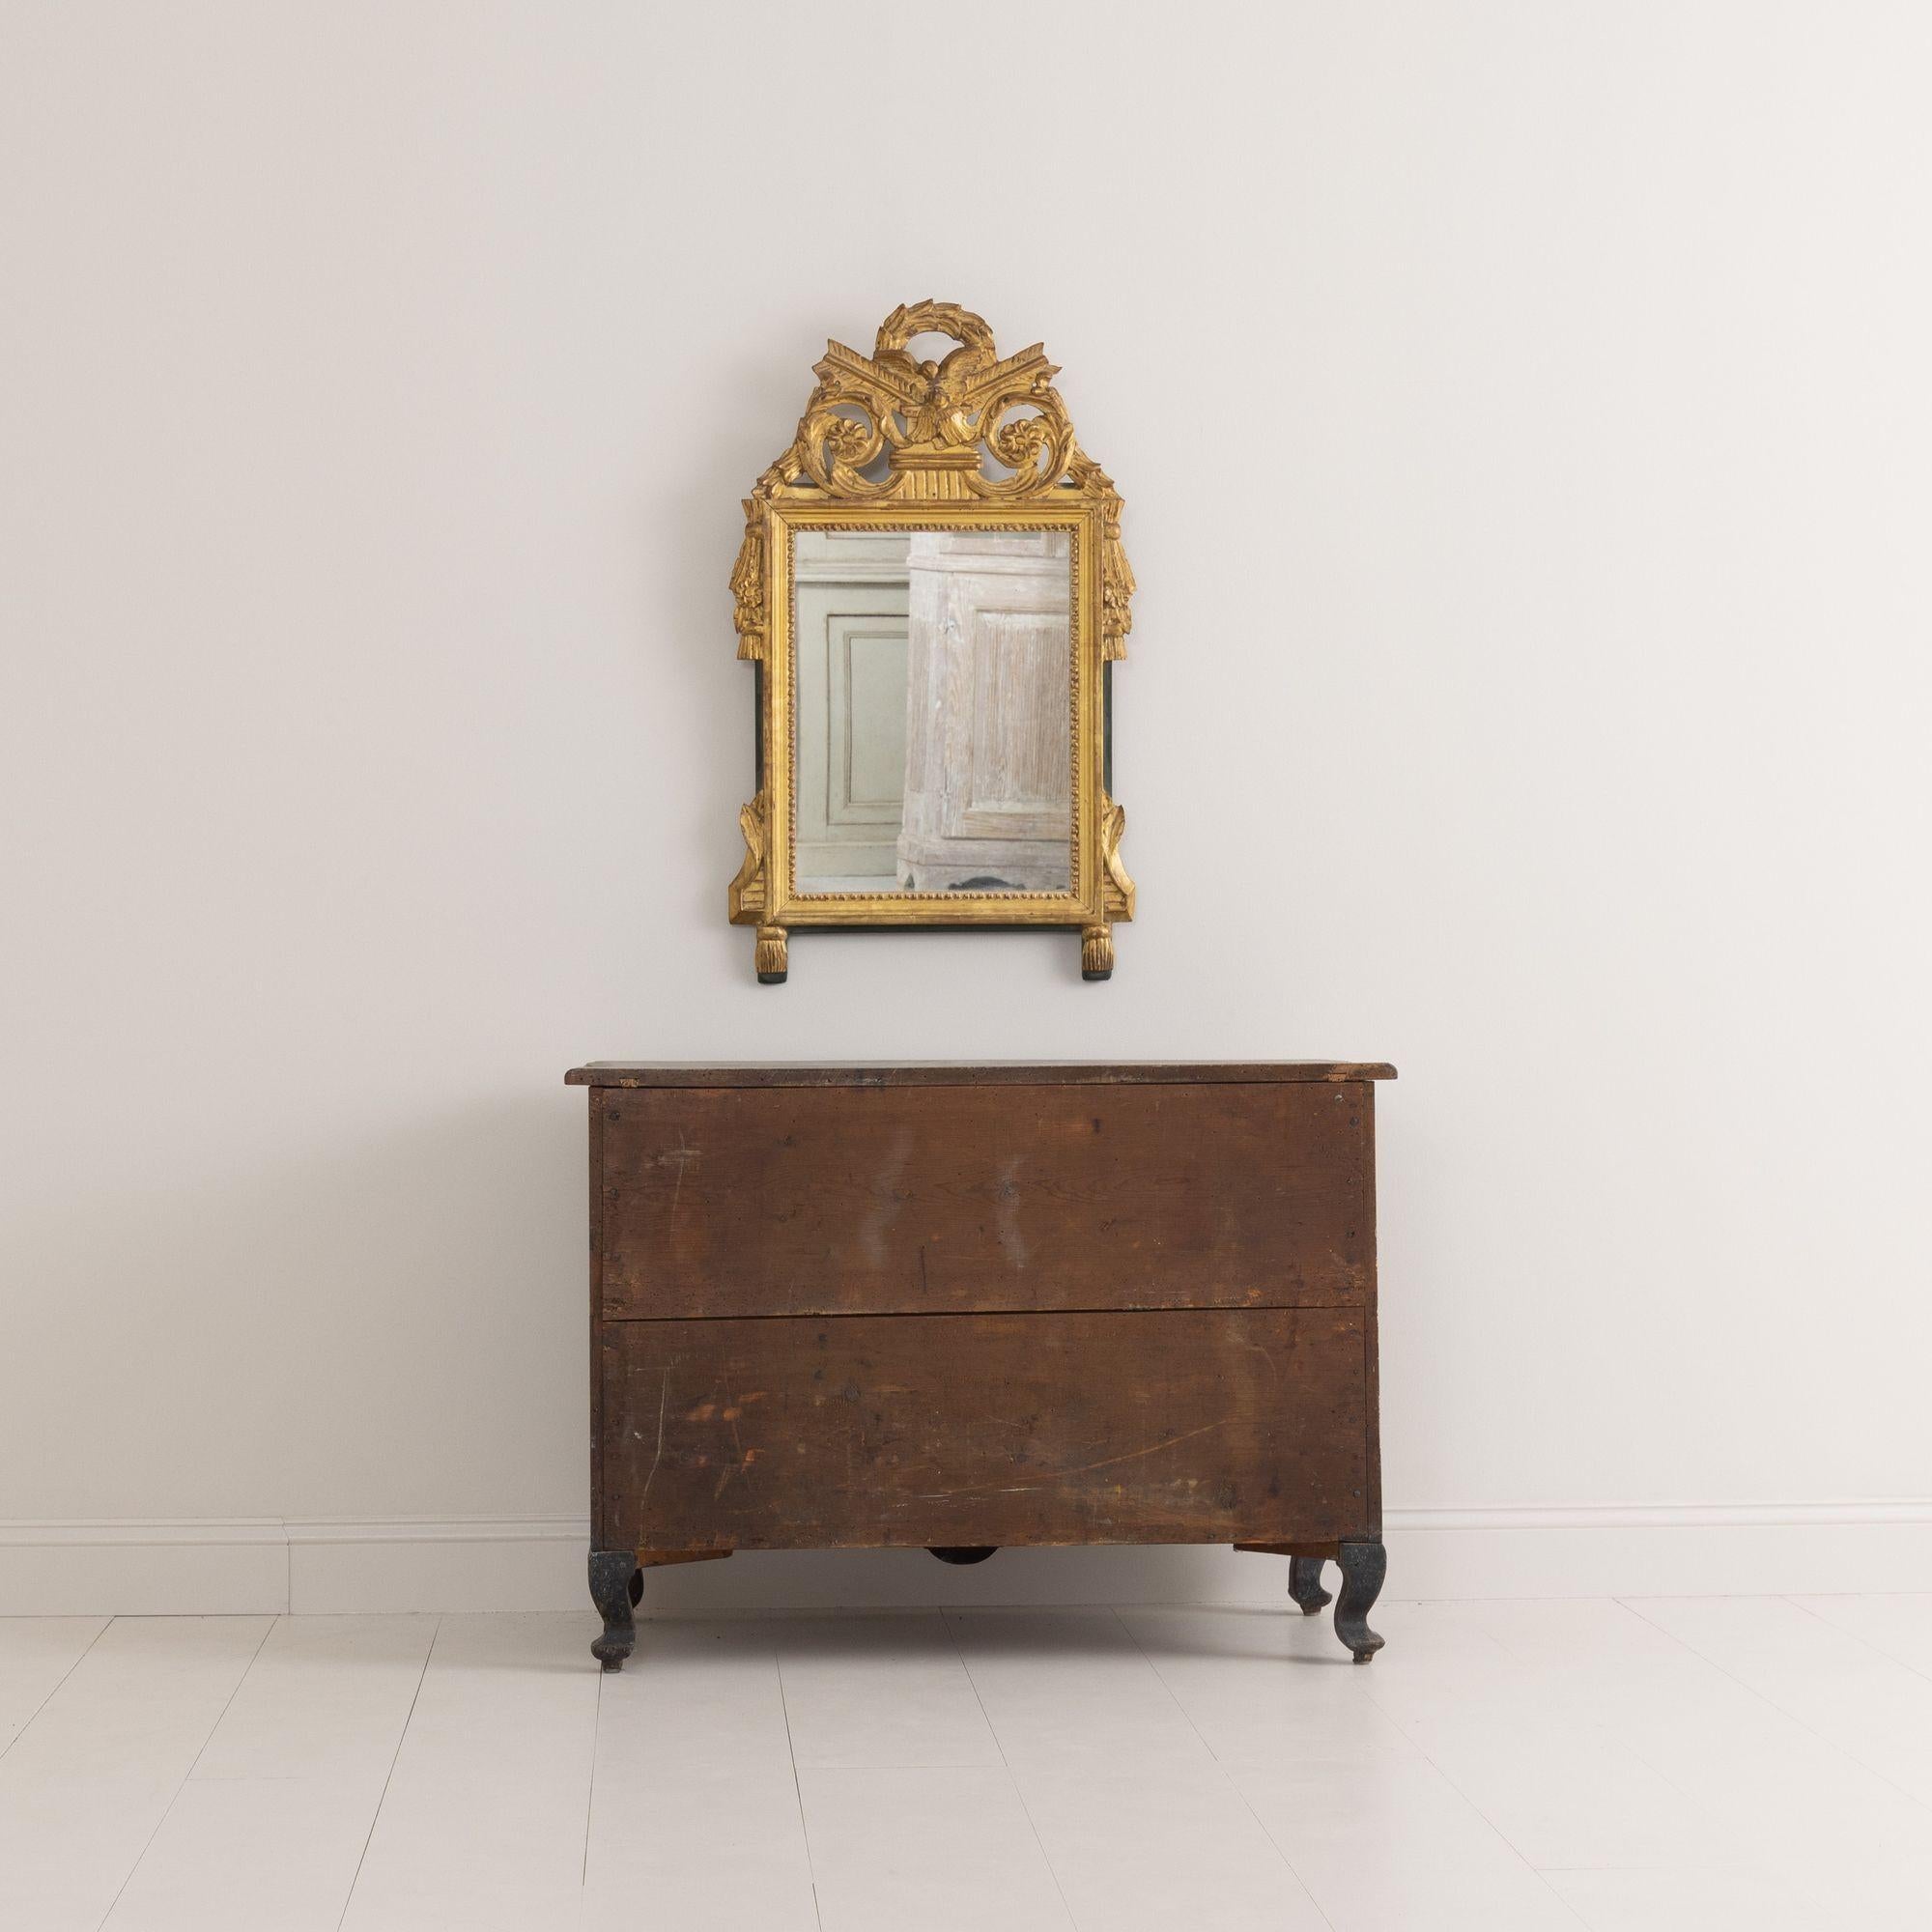 18th C. Swedish Rococo Period Black Painted Commode with Original Brass Hardware For Sale 13